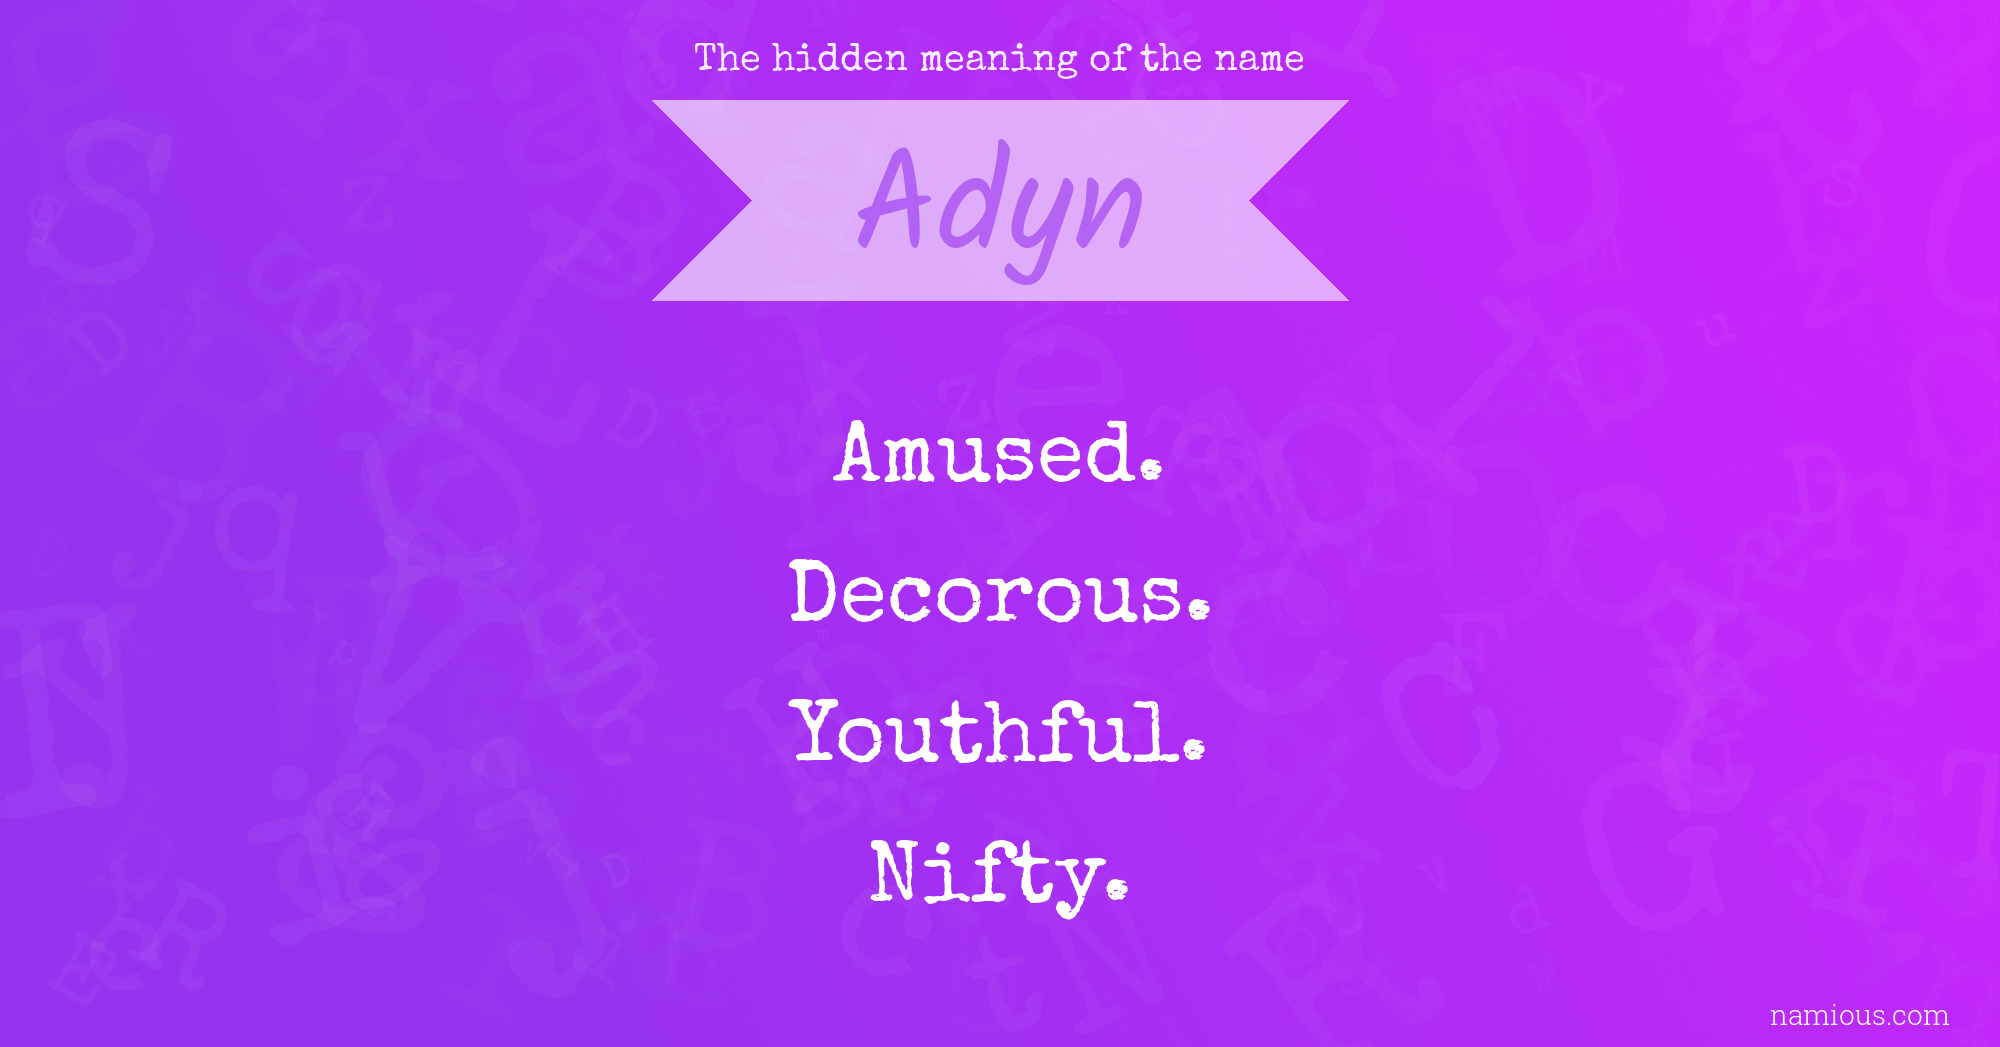 The hidden meaning of the name Adyn